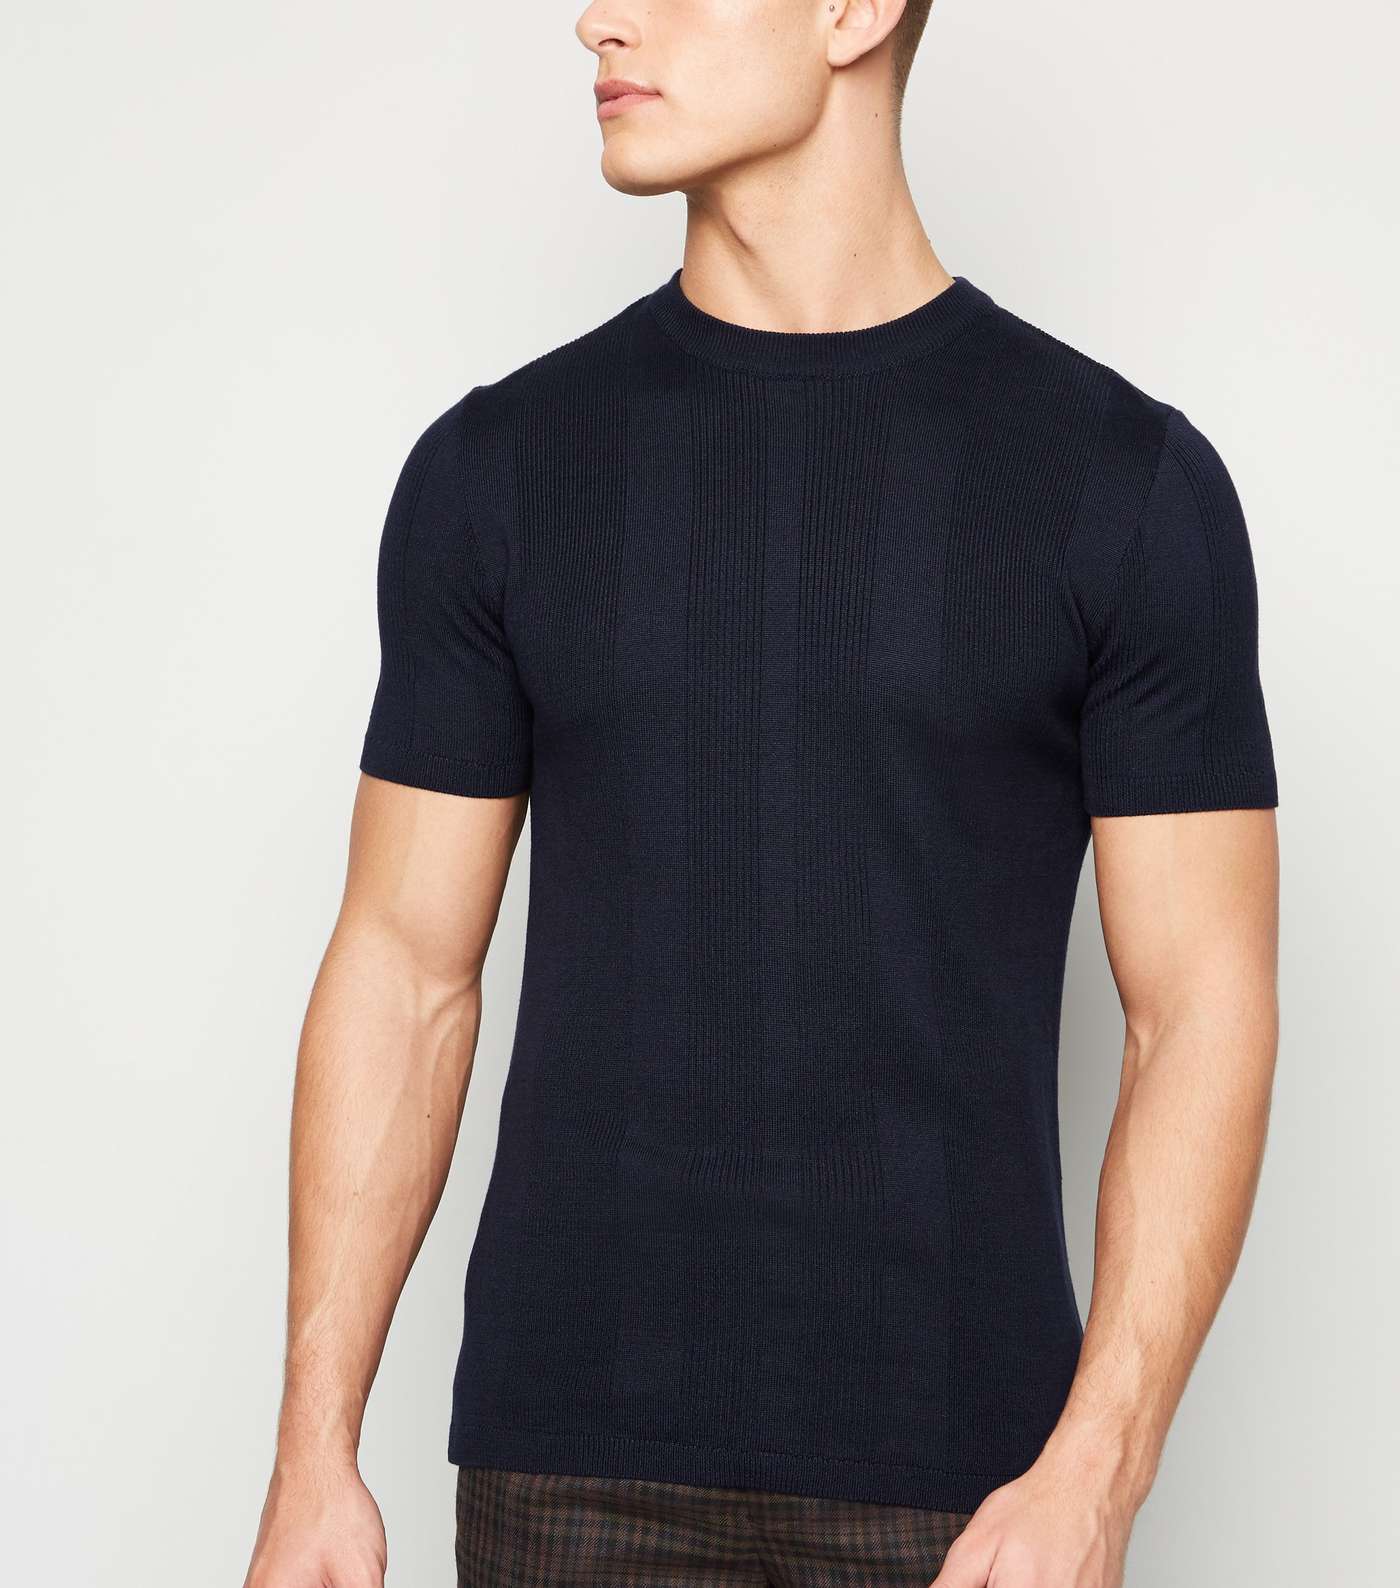 Navy Ribbed Knit Muscle Fit T-Shirt